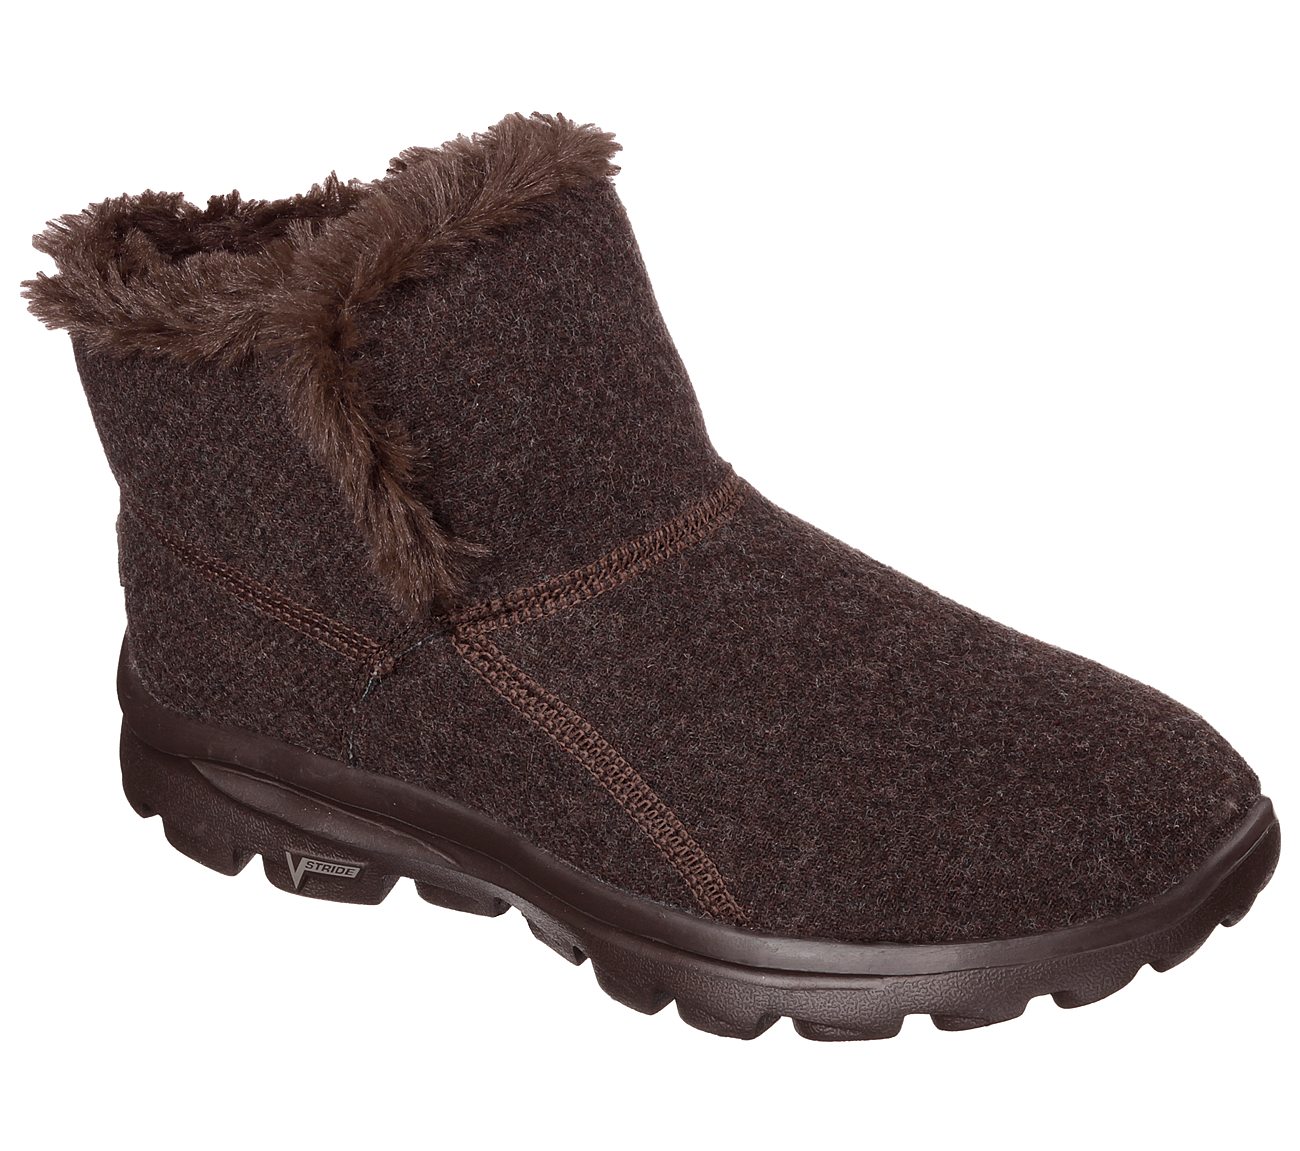 skechers boots fur lined Sale,up to 76 